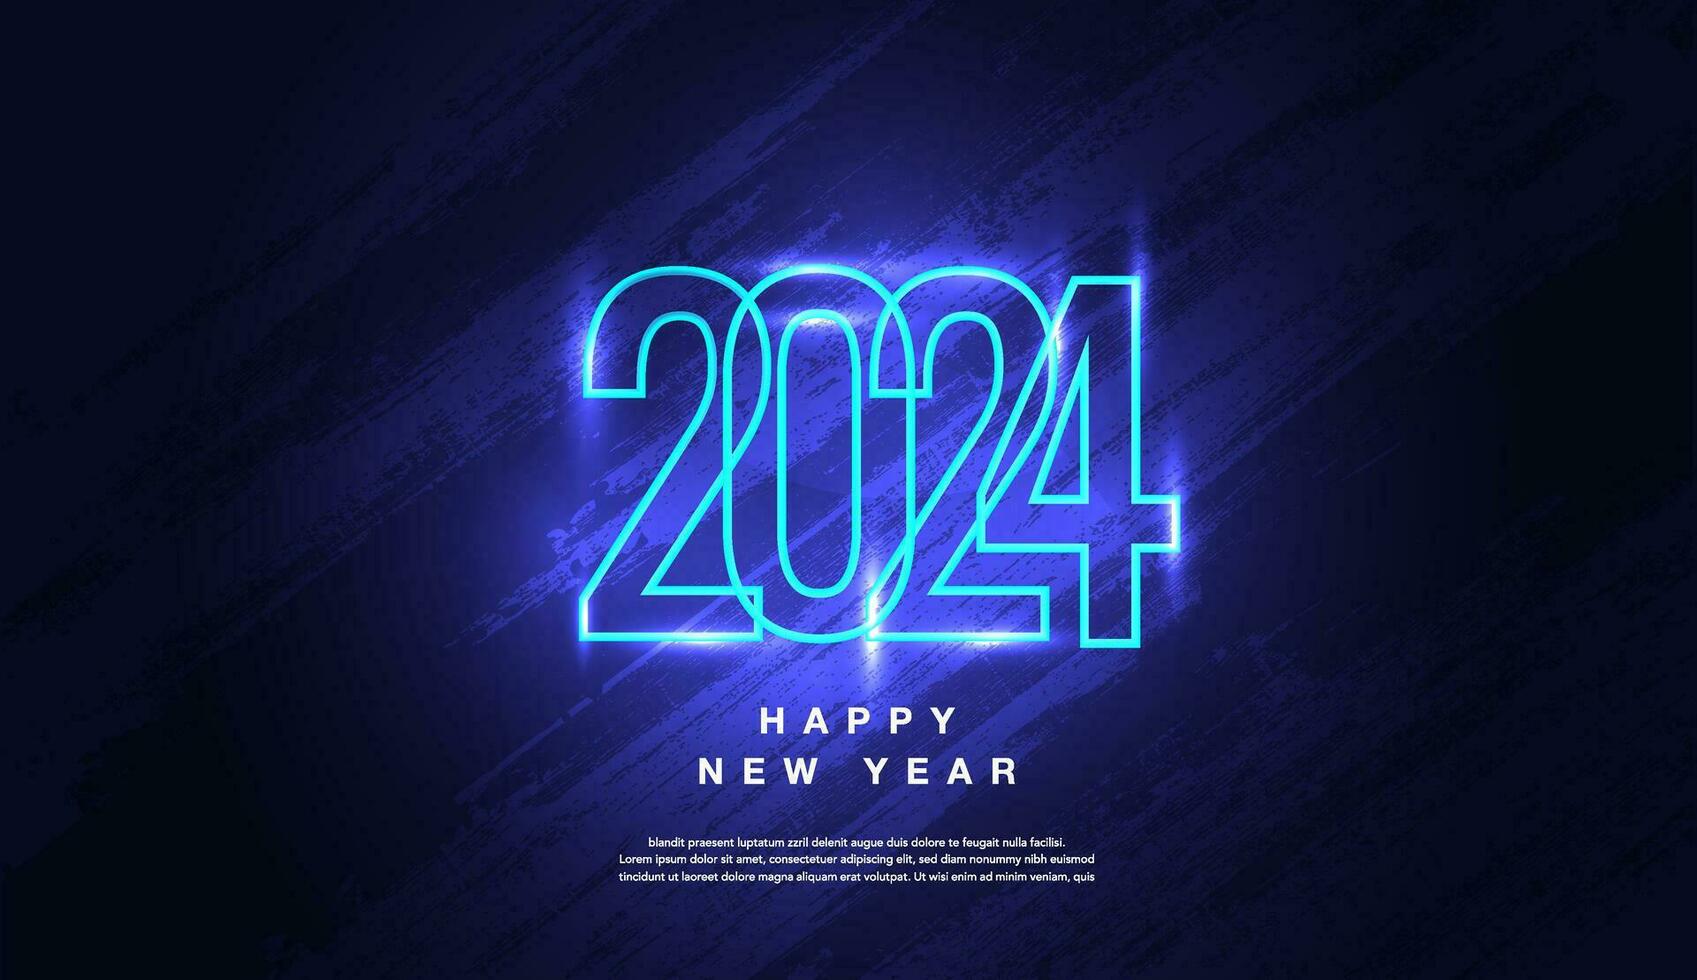 Happy New Year 2024, Blue Glowing Neon Light, texture background vector